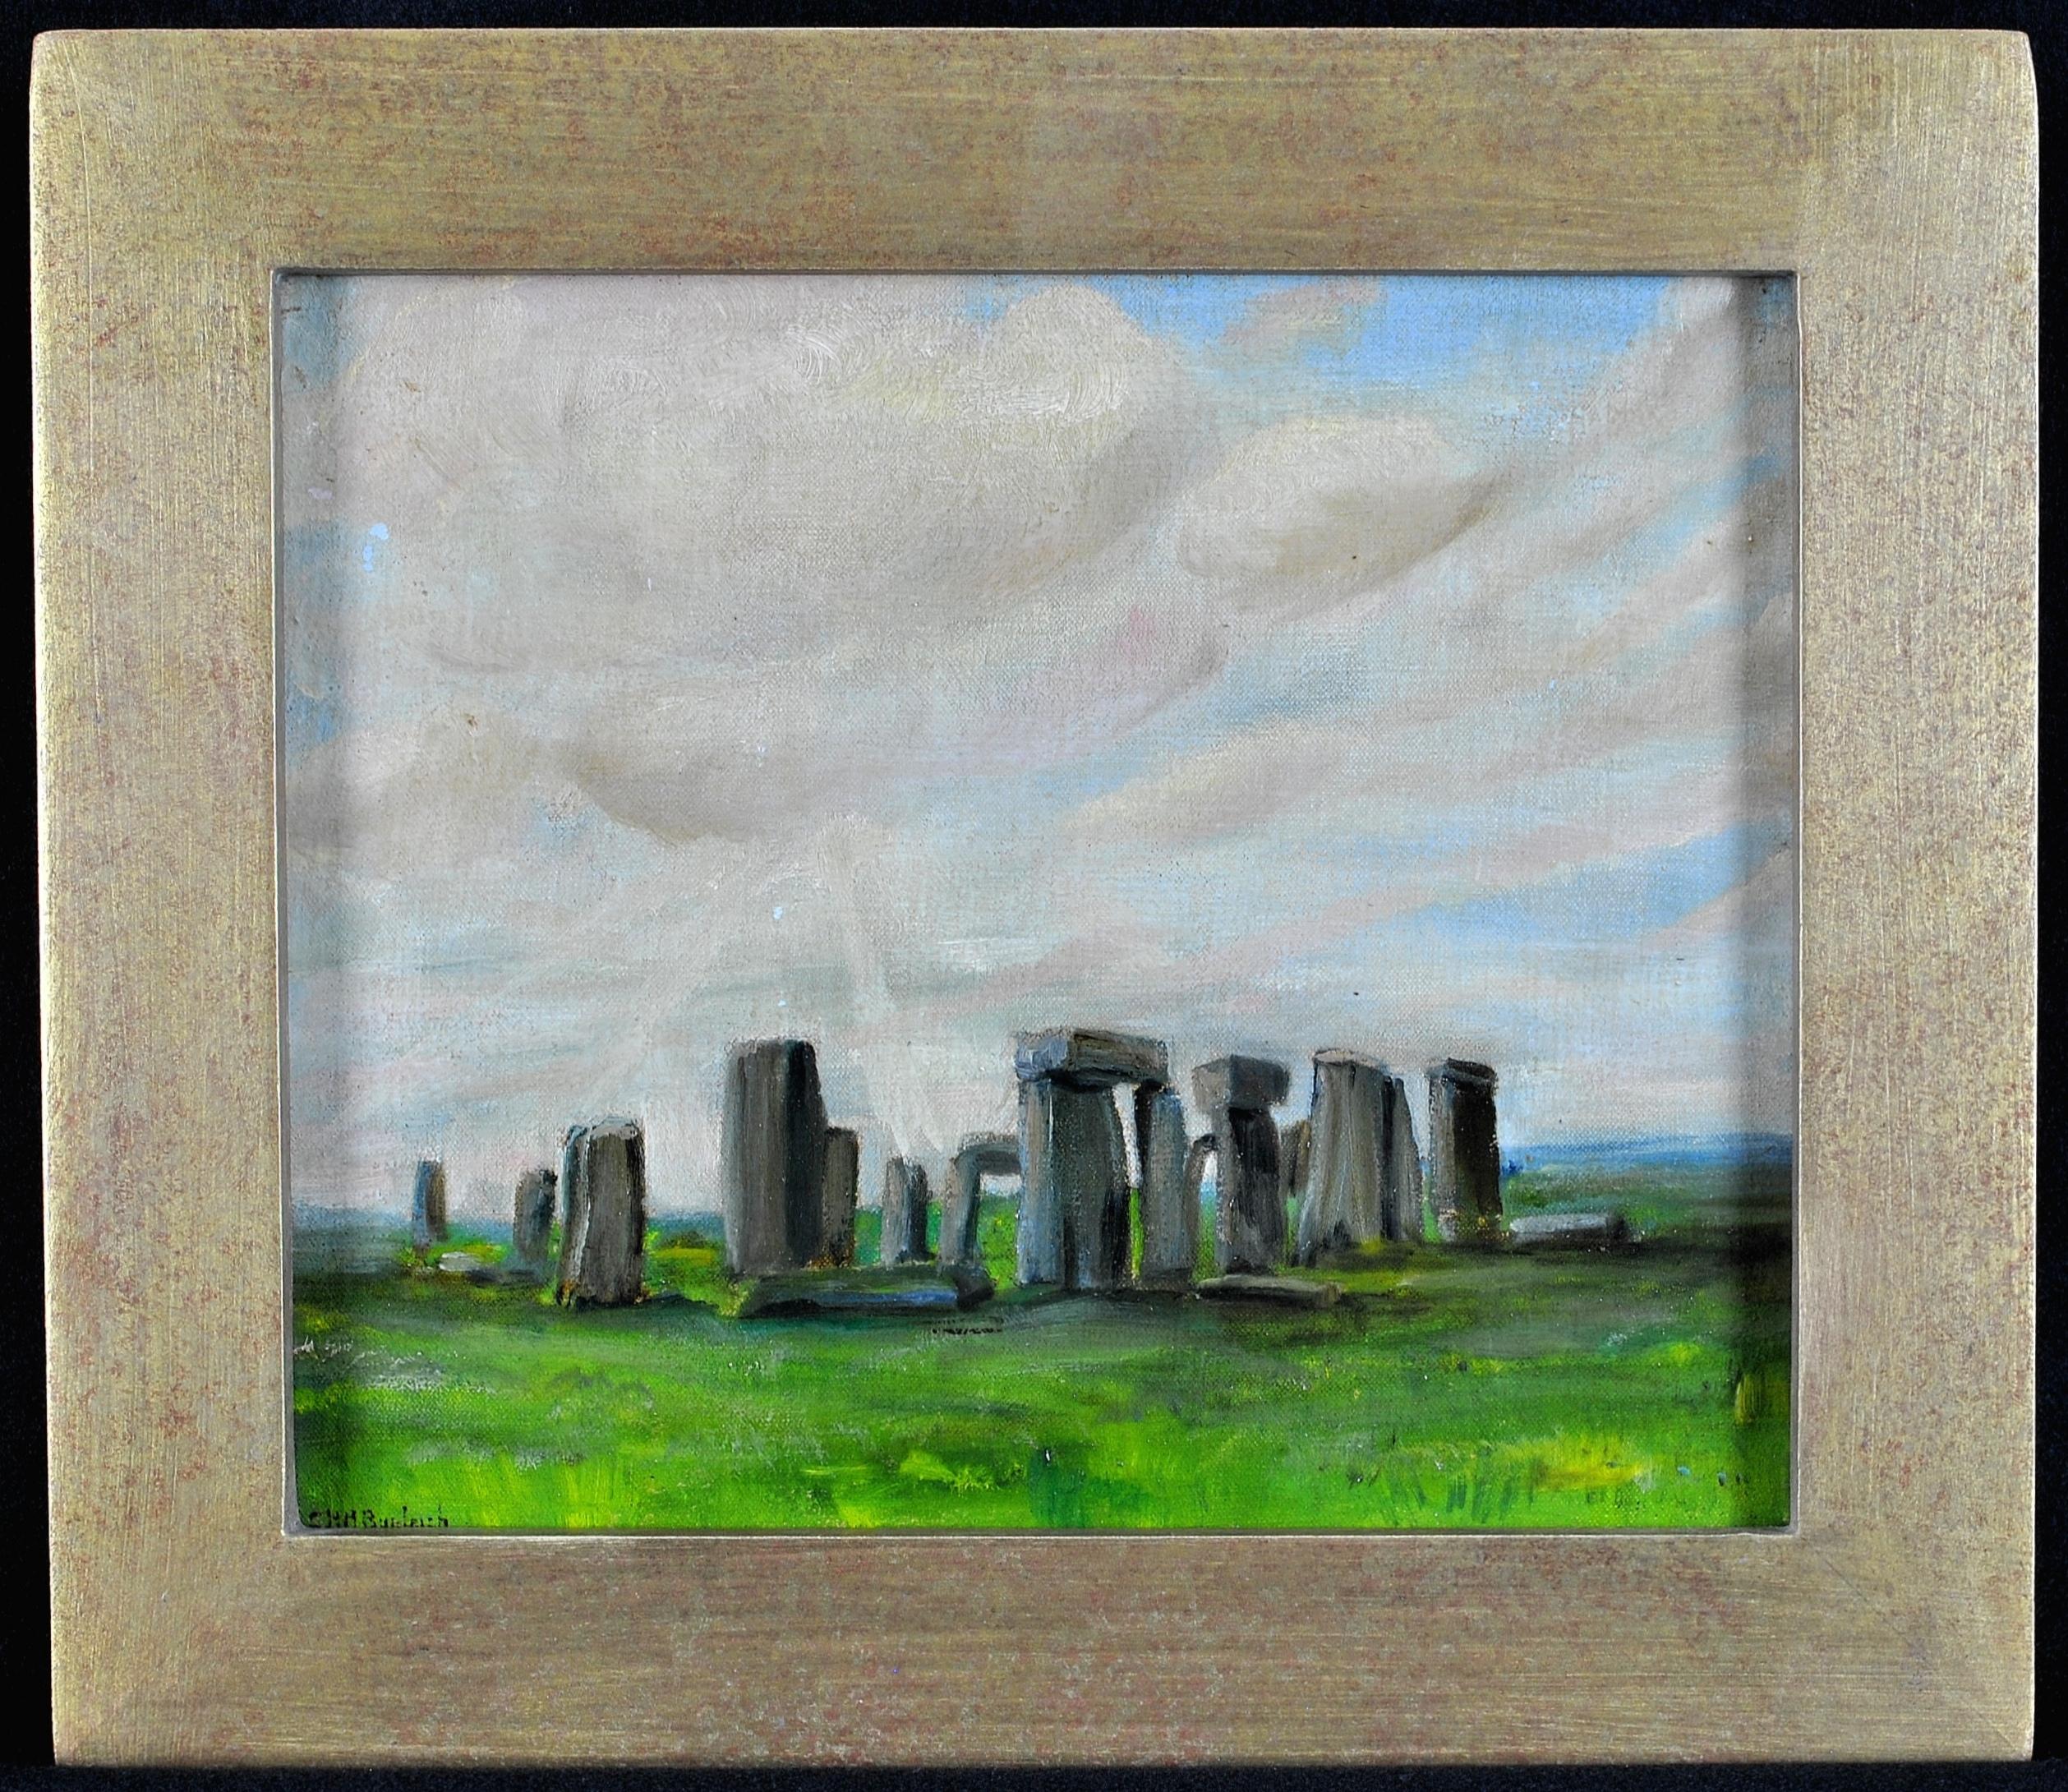 Charles Henry Harrison Burleigh Landscape Painting - Stonehenge - Early 20th Century English Landscape Antique Oil on Canvas Painting